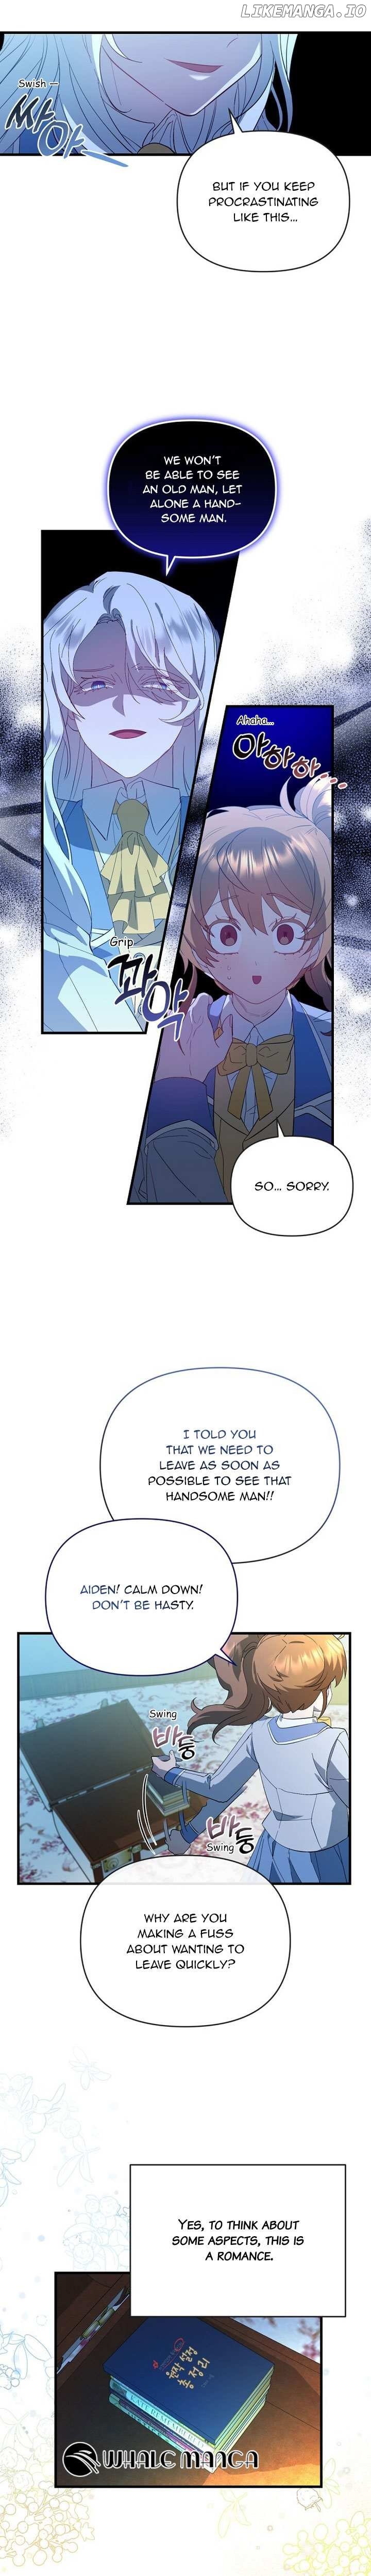 My Childhood Friend Is a BL Novel Protagonist Chapter 1 - page 8